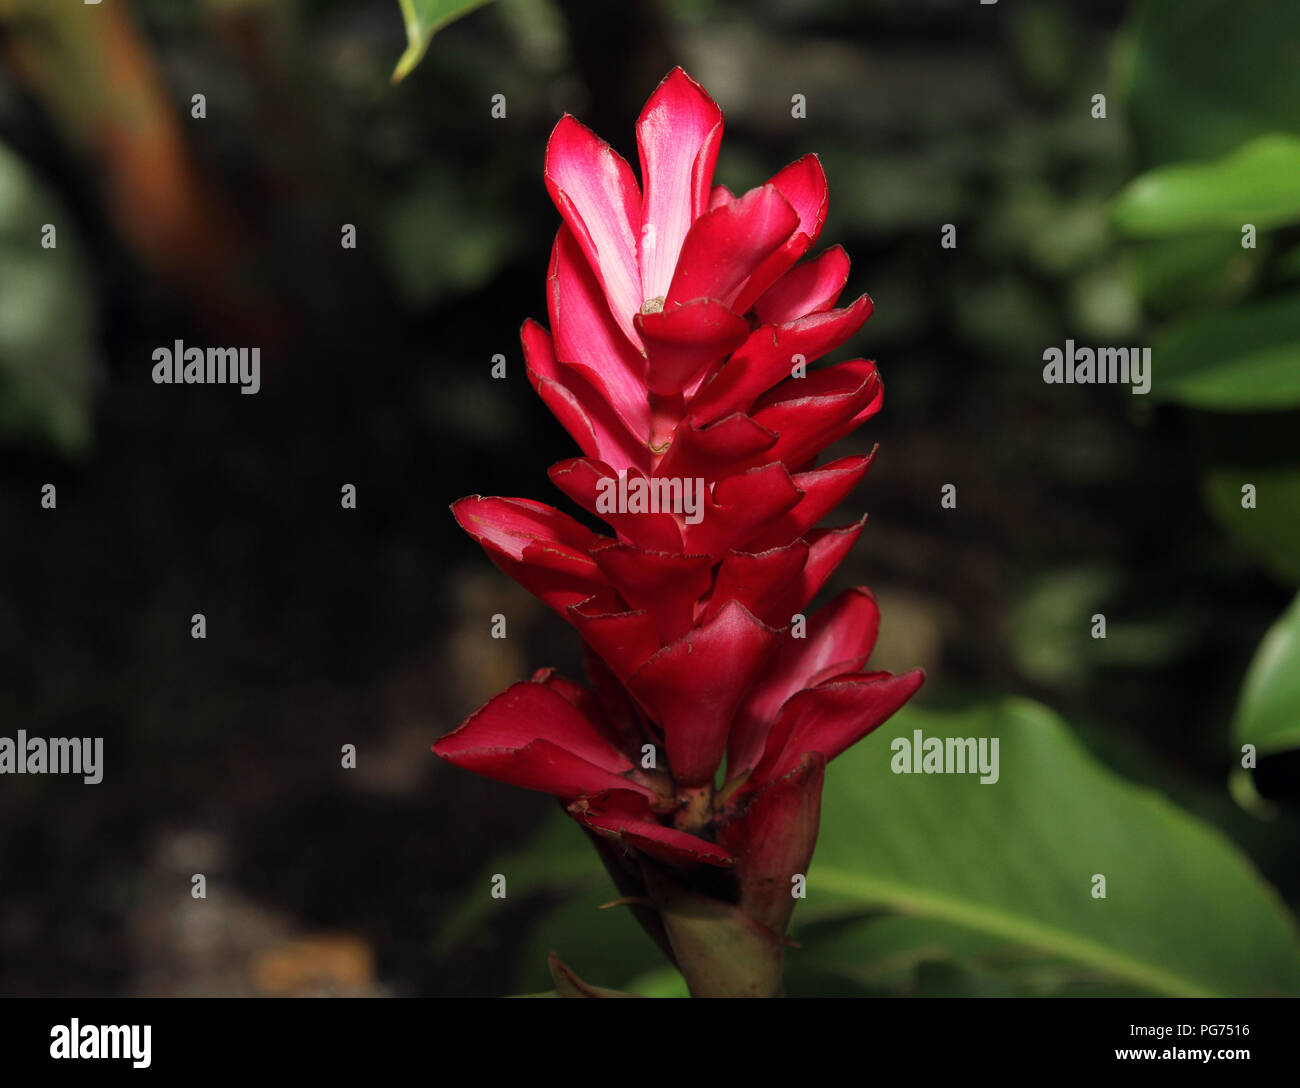 Colorful Plants and Flowers Stock Photo - Alamy